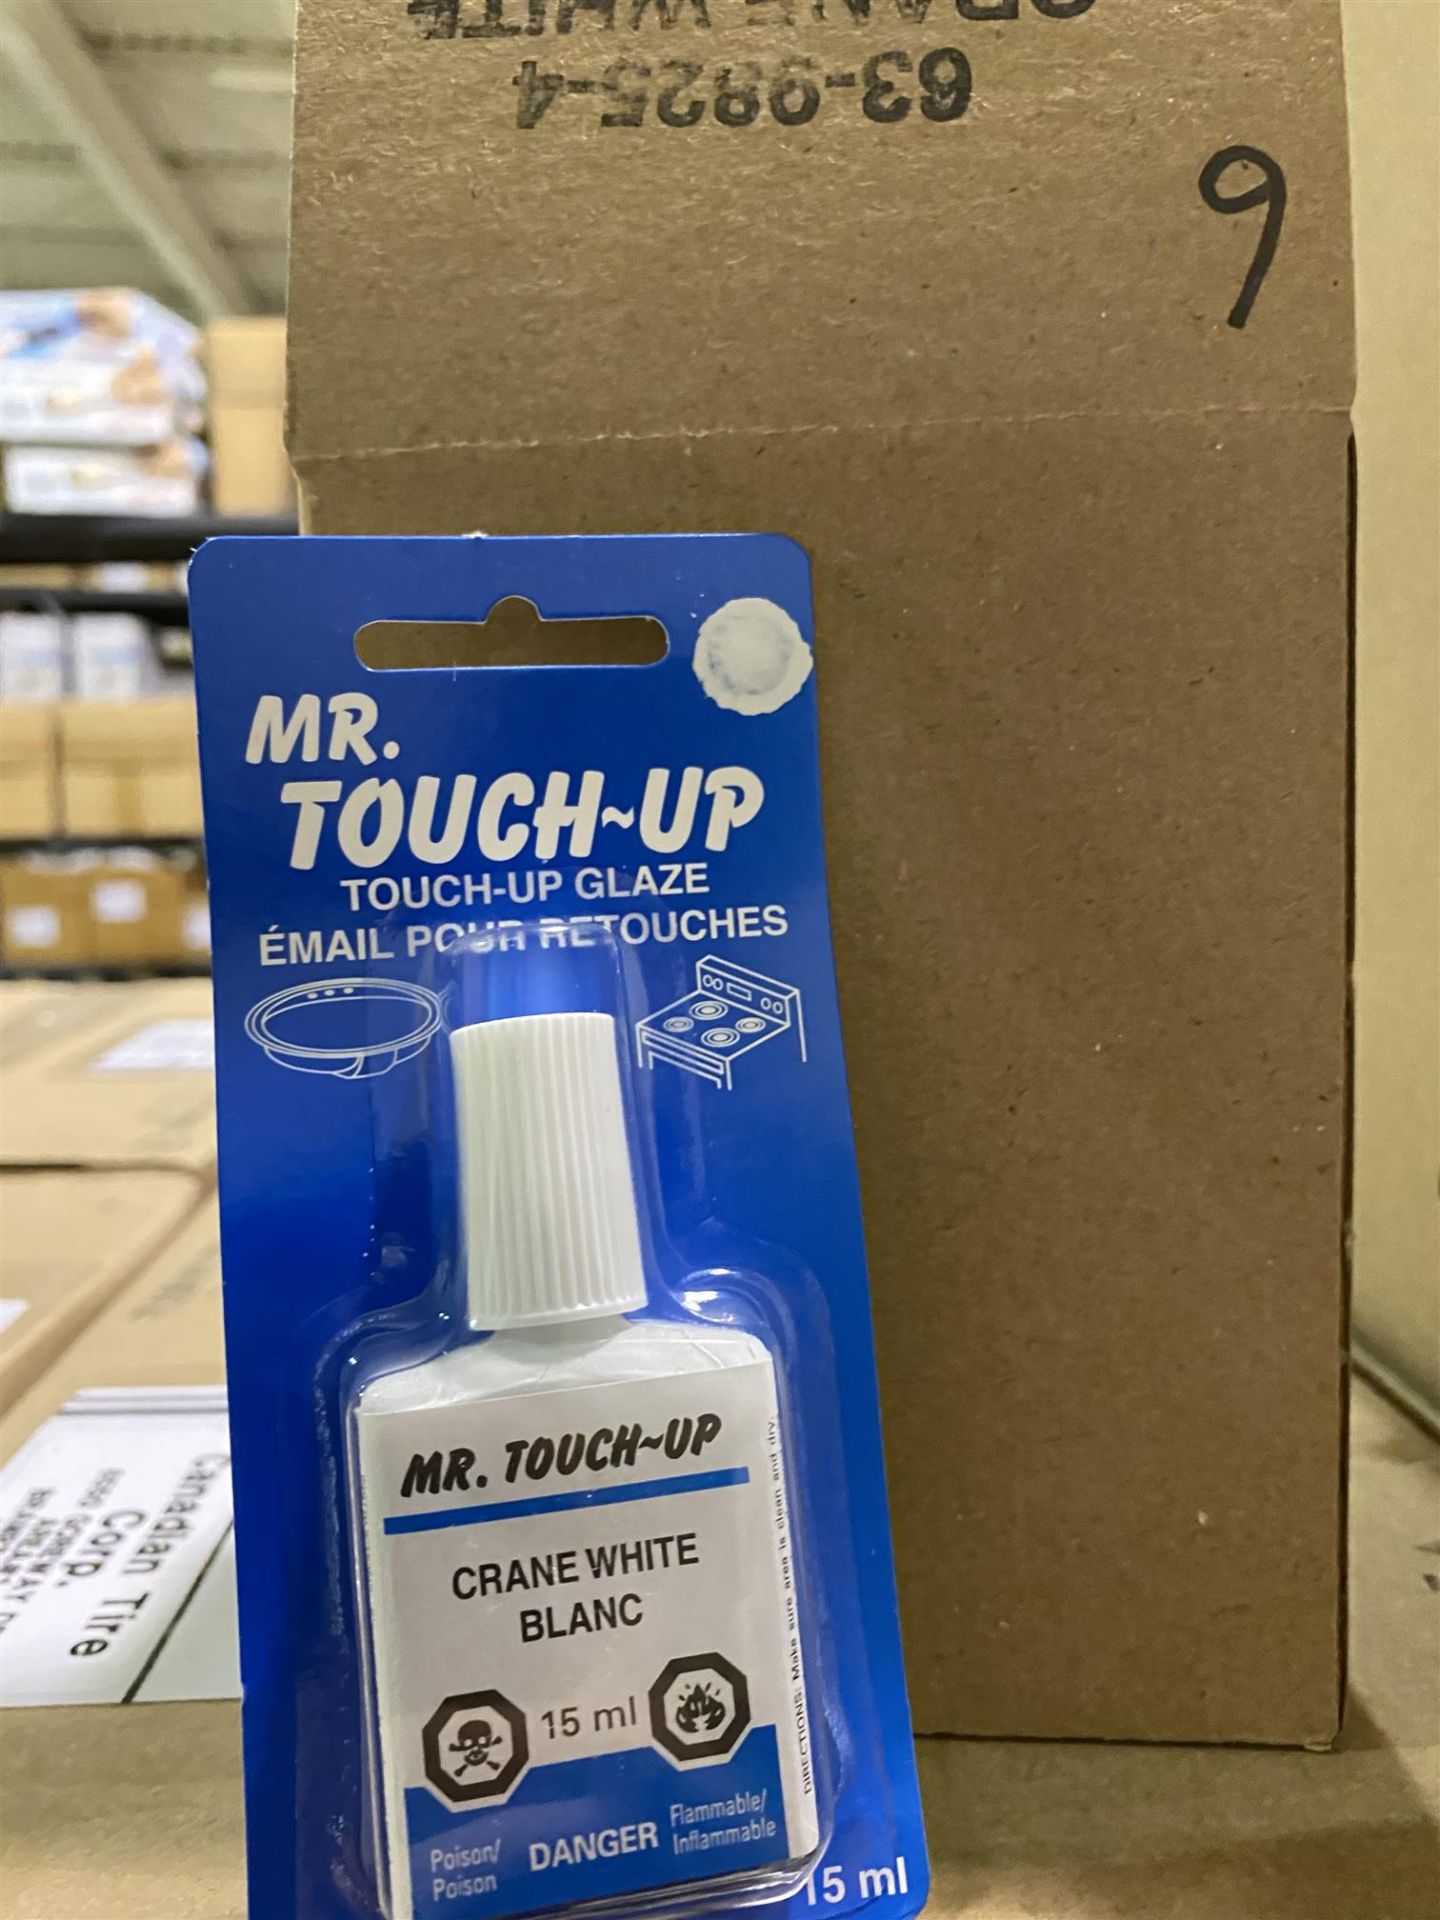 MR. TOUCH-UP - TOUCH-UP GLAZE - CRANE WHITE - 15ML - 72PCS - Image 2 of 2